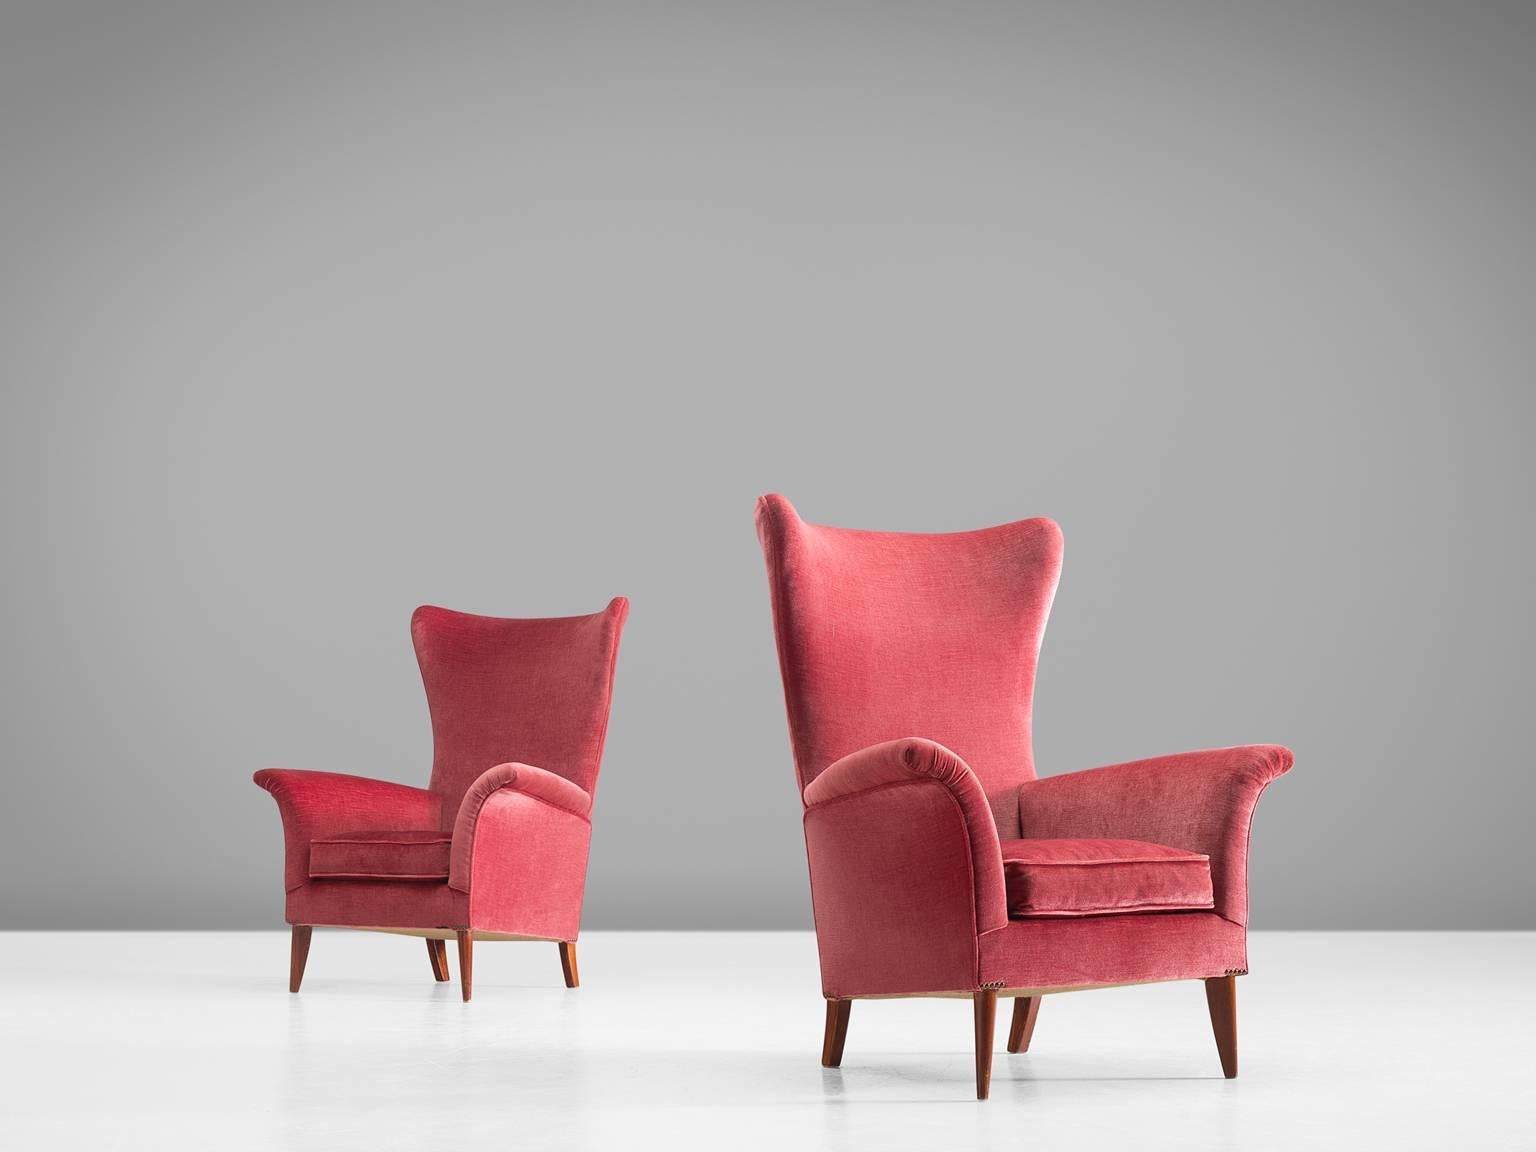 Set of two high wingback chairs, velvet and wood, Italy, 1950s. 

Pair of elegant Italian pink to vermillion red wingback lounge chairs. Beautiful organic formed seating, with solid wooden legs. The gentle flared armrests and seating give this